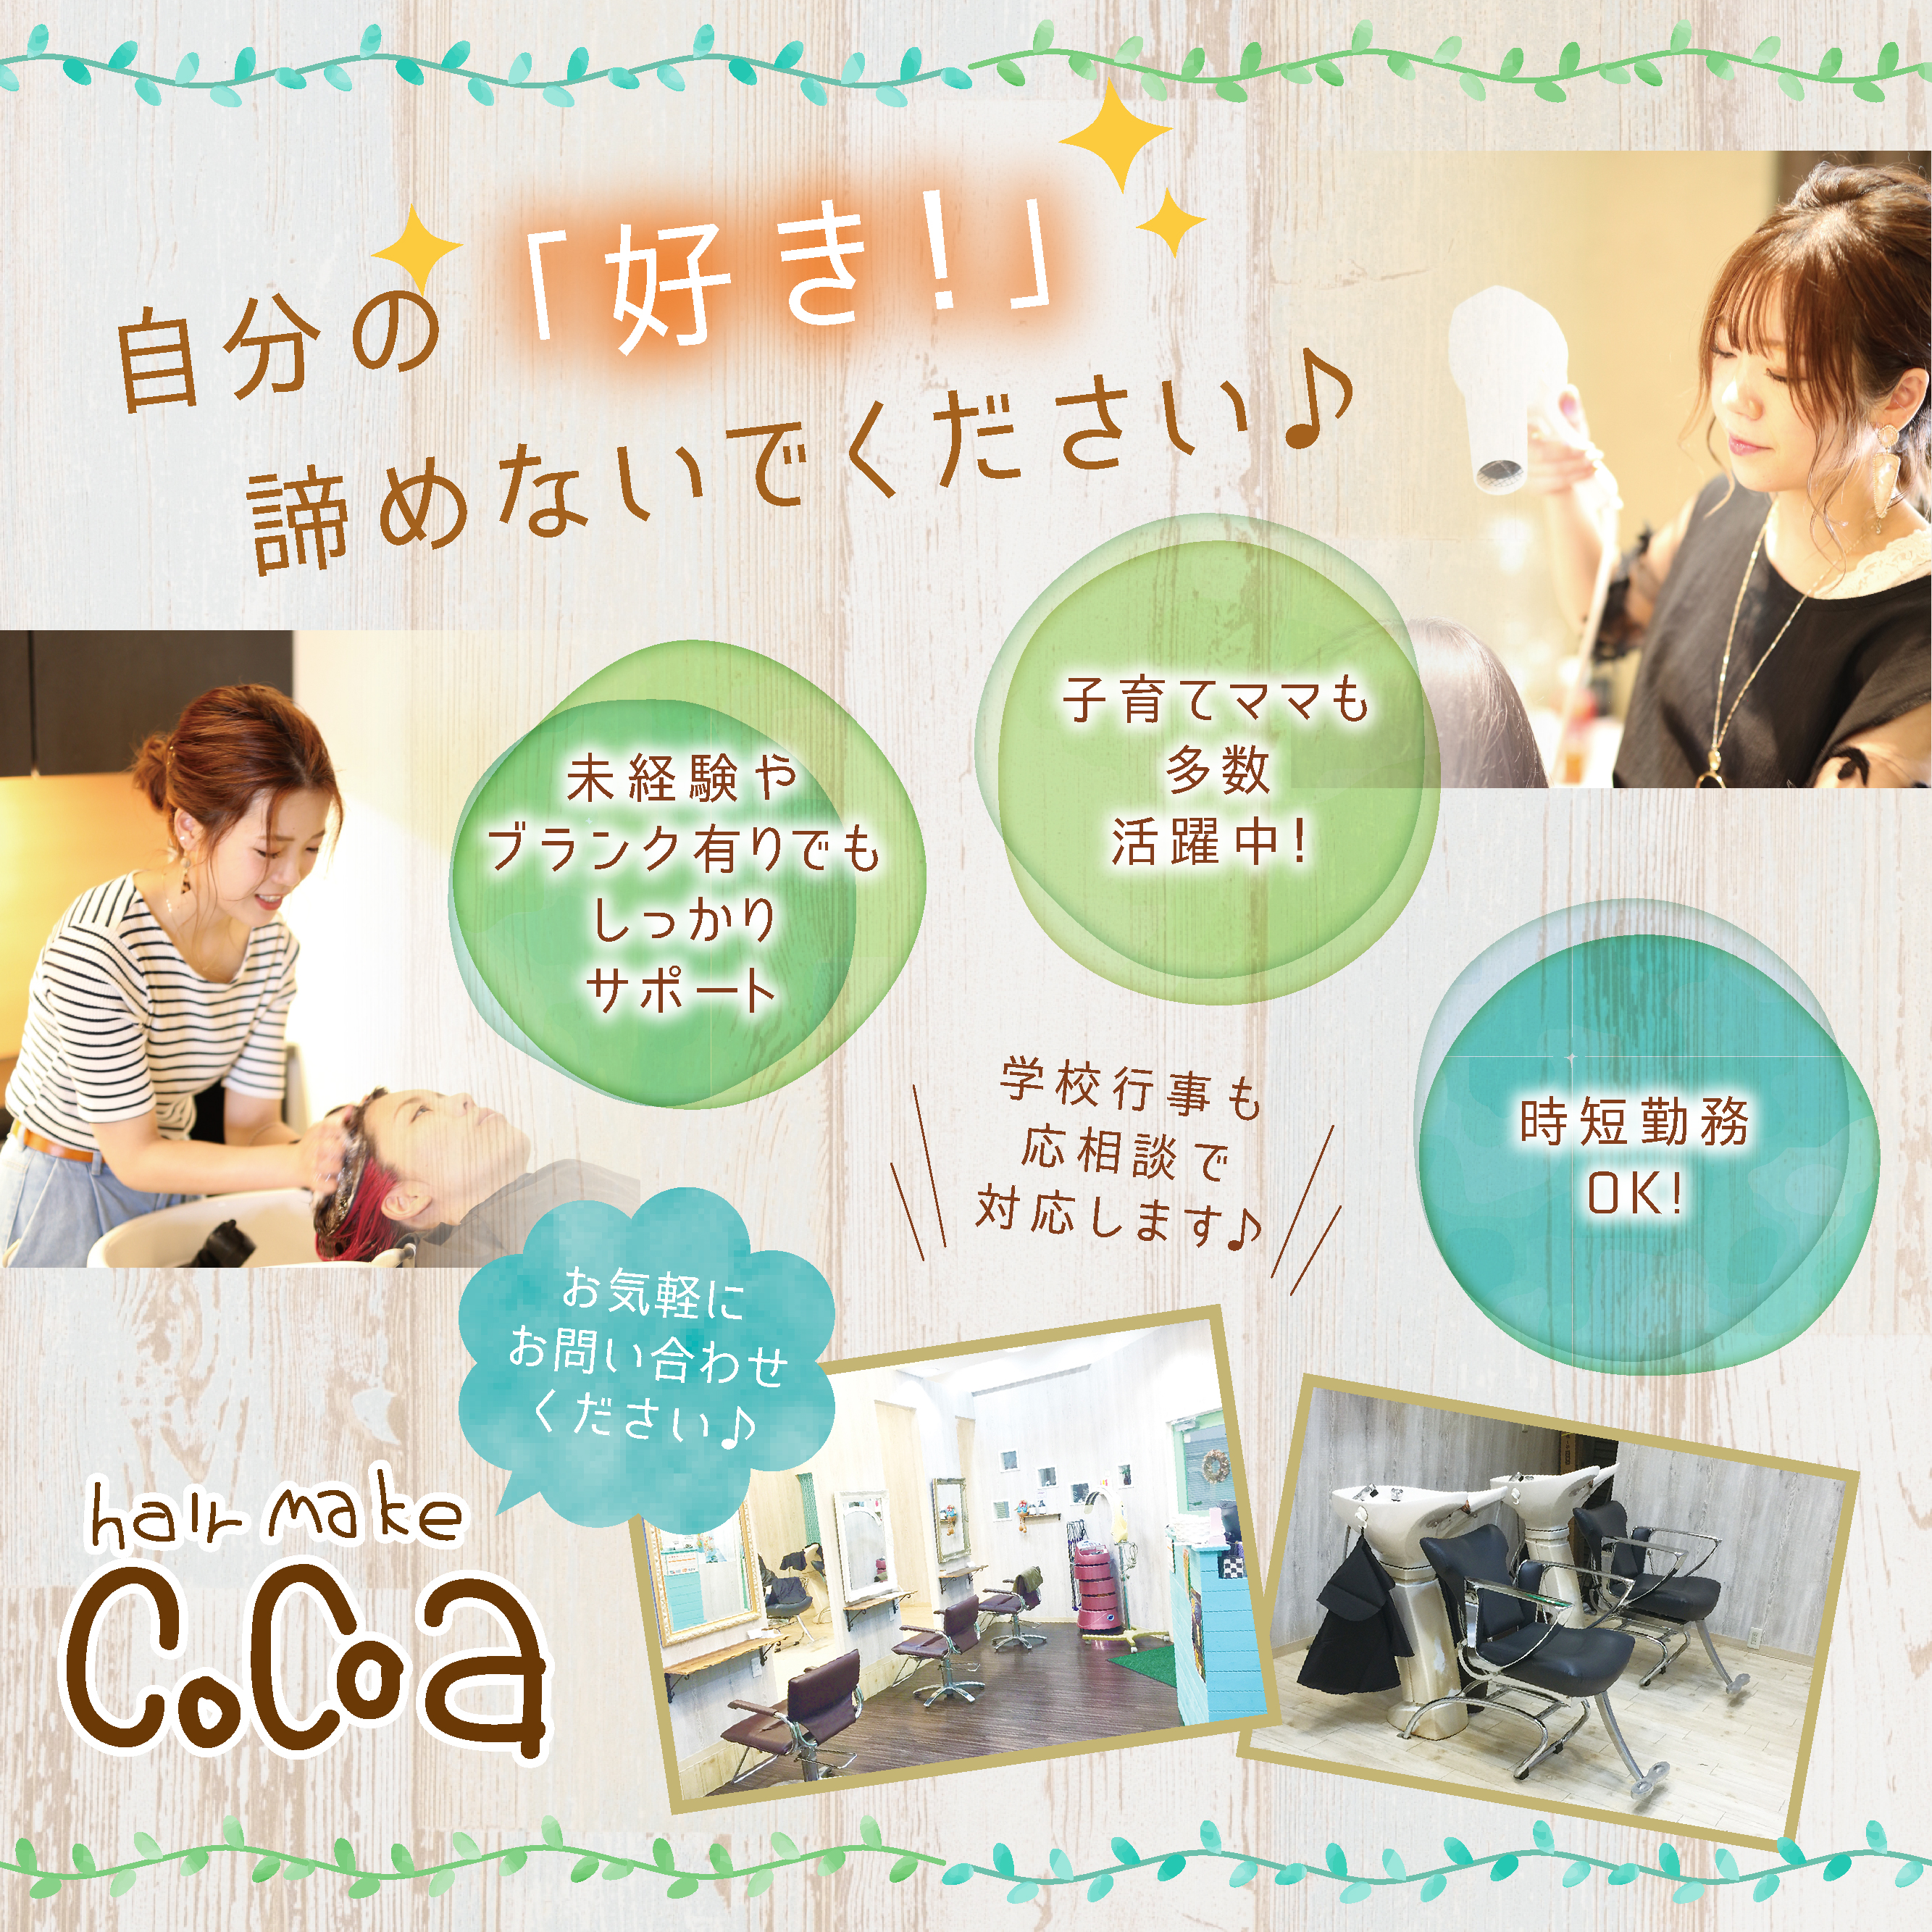 Hair Make COCOA【ヘアメイクココア】 求人情報